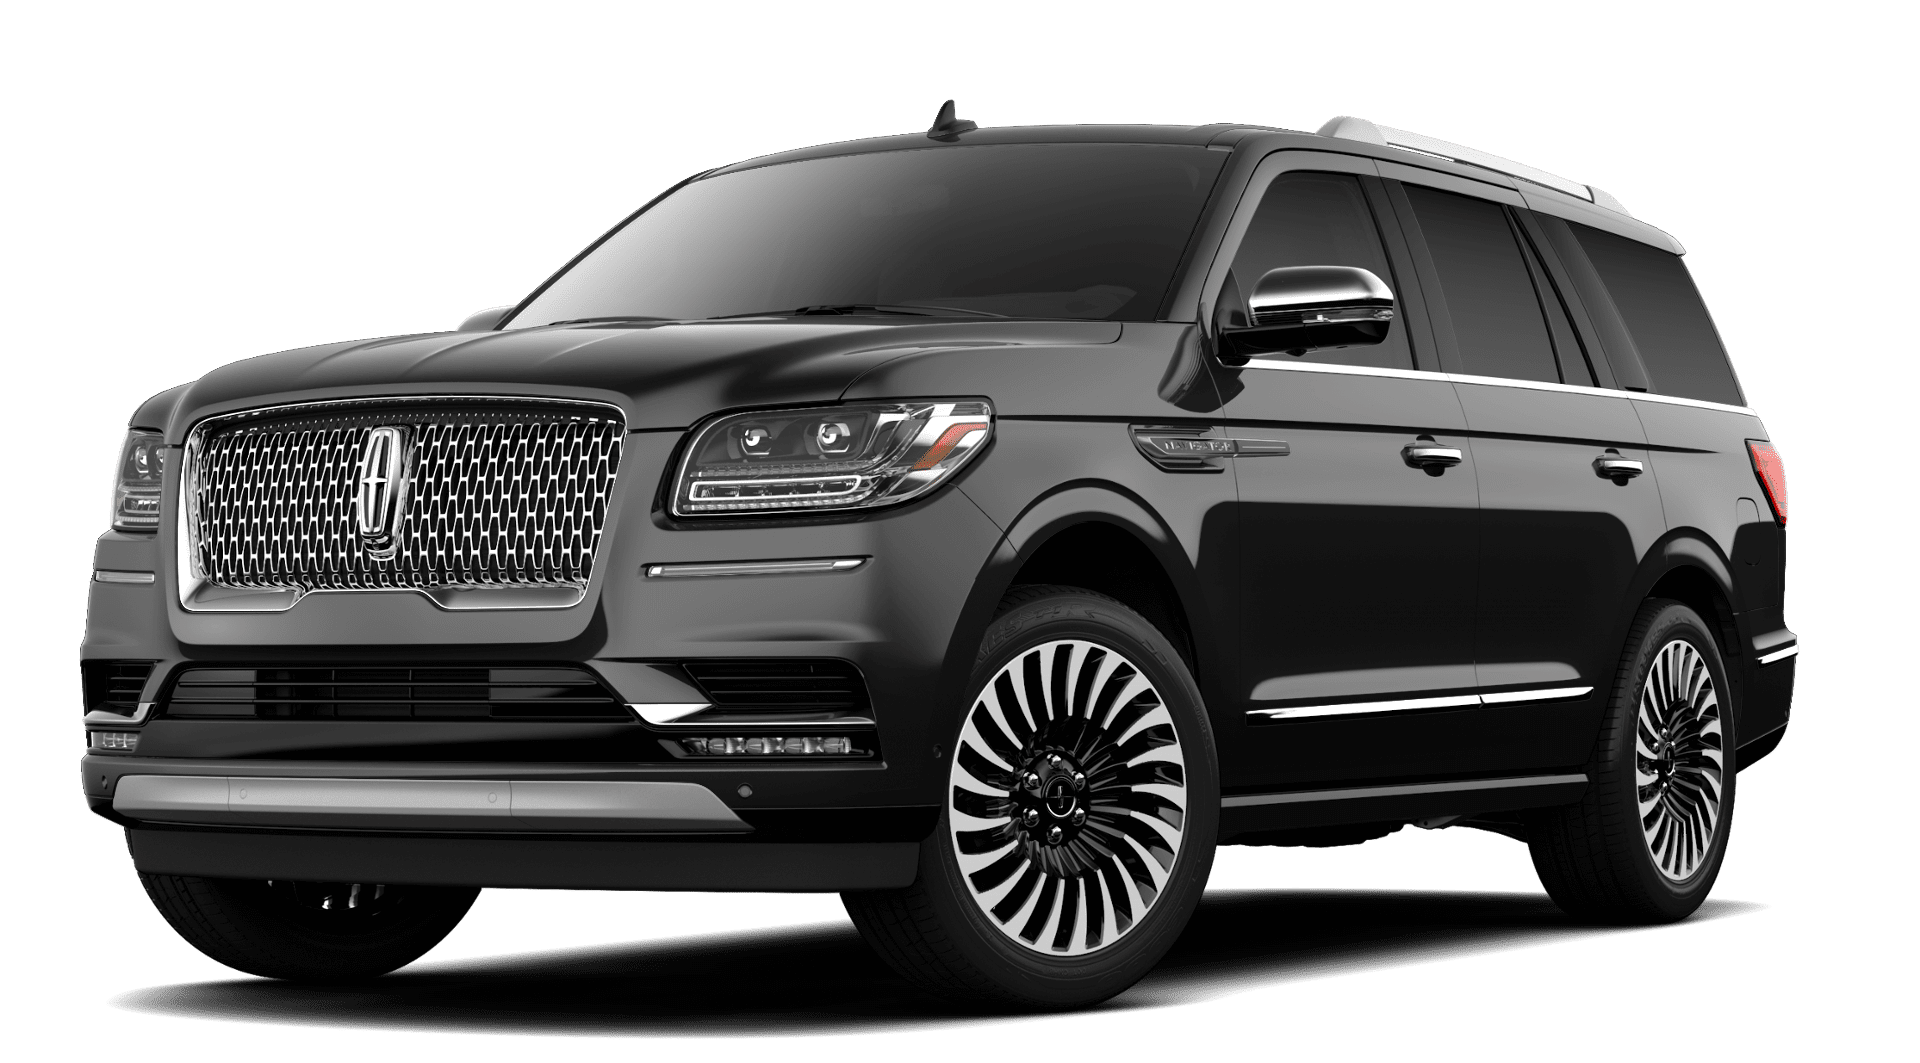 SUV Limo Chicago, SUV Car Service Chicago, Union Station to Airport, SUV Chicago Limo, Lincoln Navigator, SUV Service Chicago, Black SUV Service, Luxury SUV